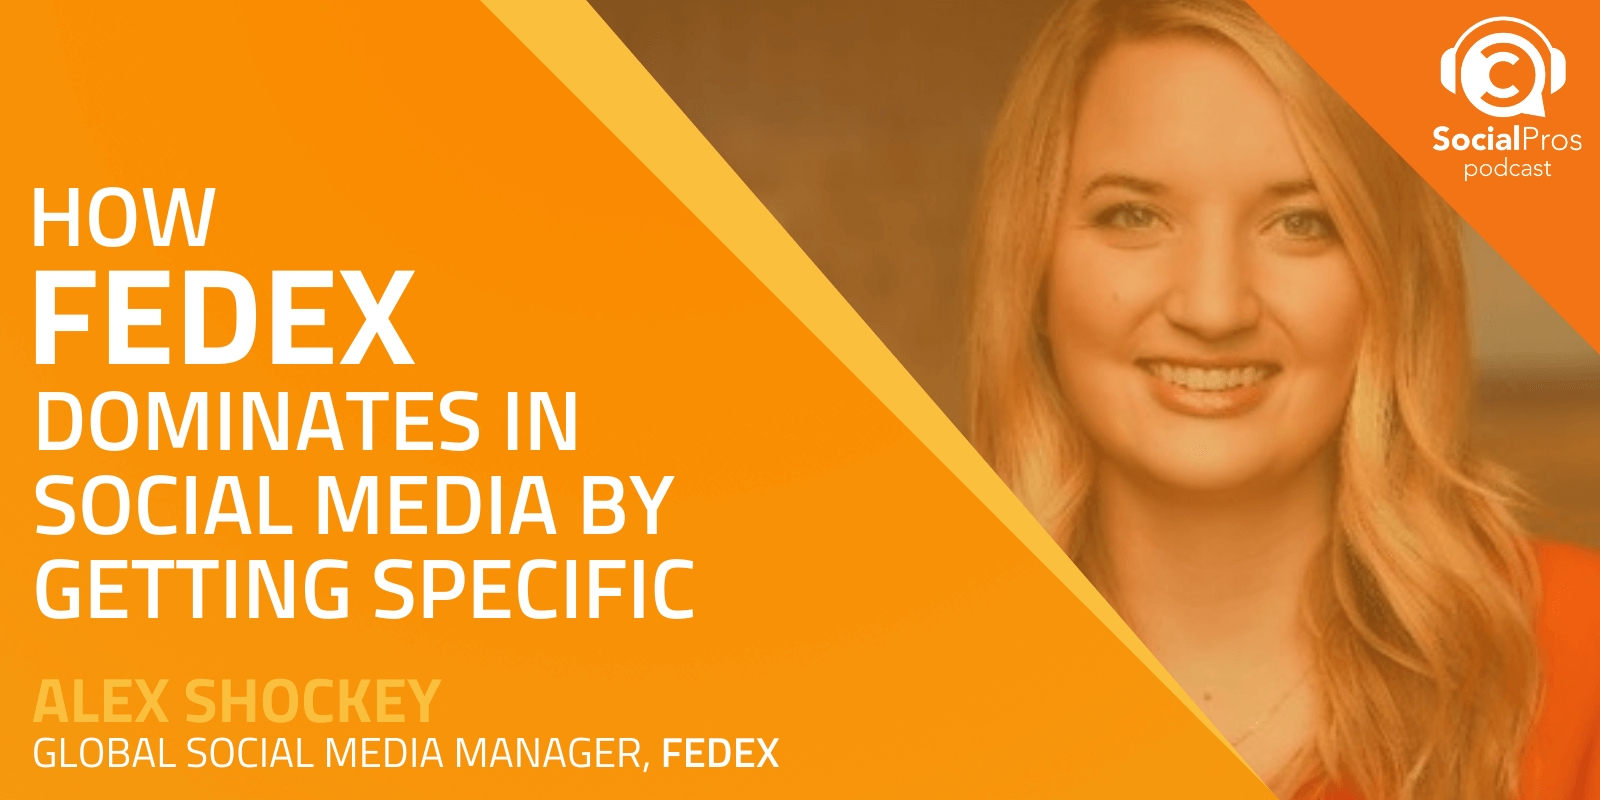 How FedEx Dominates in Social Media by Getting Specific